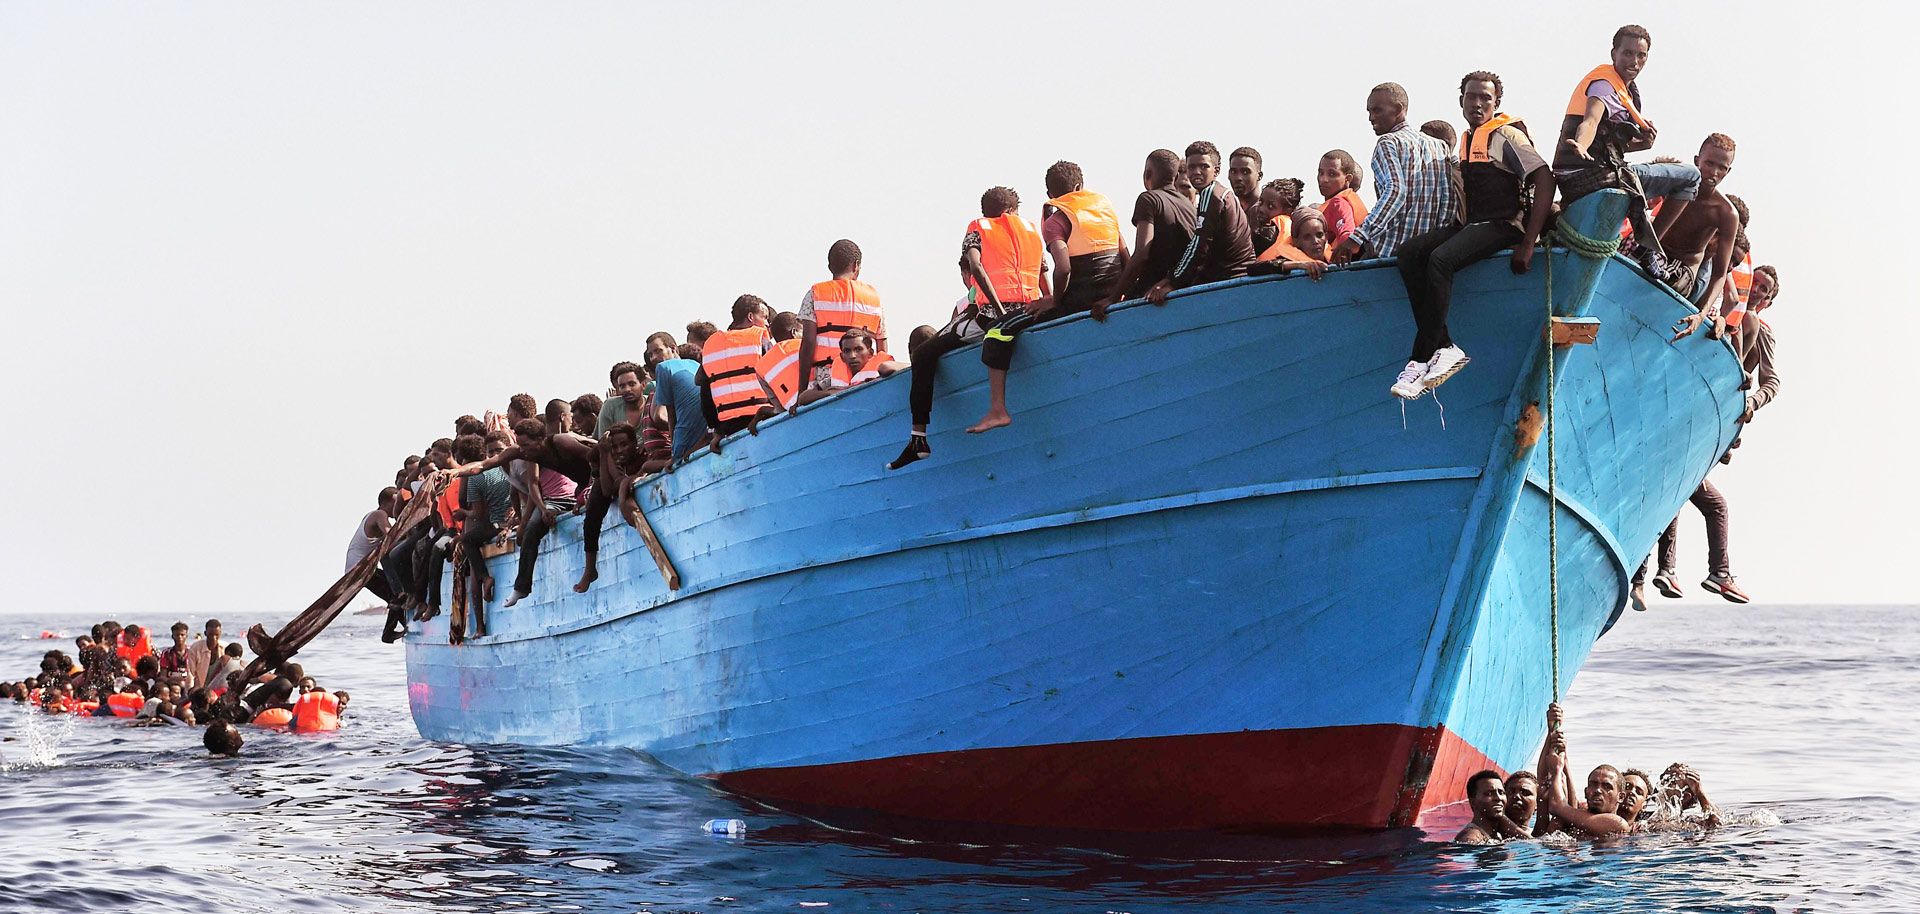 Each year, thousands of migrants reach Europe from North Africa by way of the central and eastern Mediterranean routes. Now the European Union is looking for ways to put a stop to these treacherous journeys. 